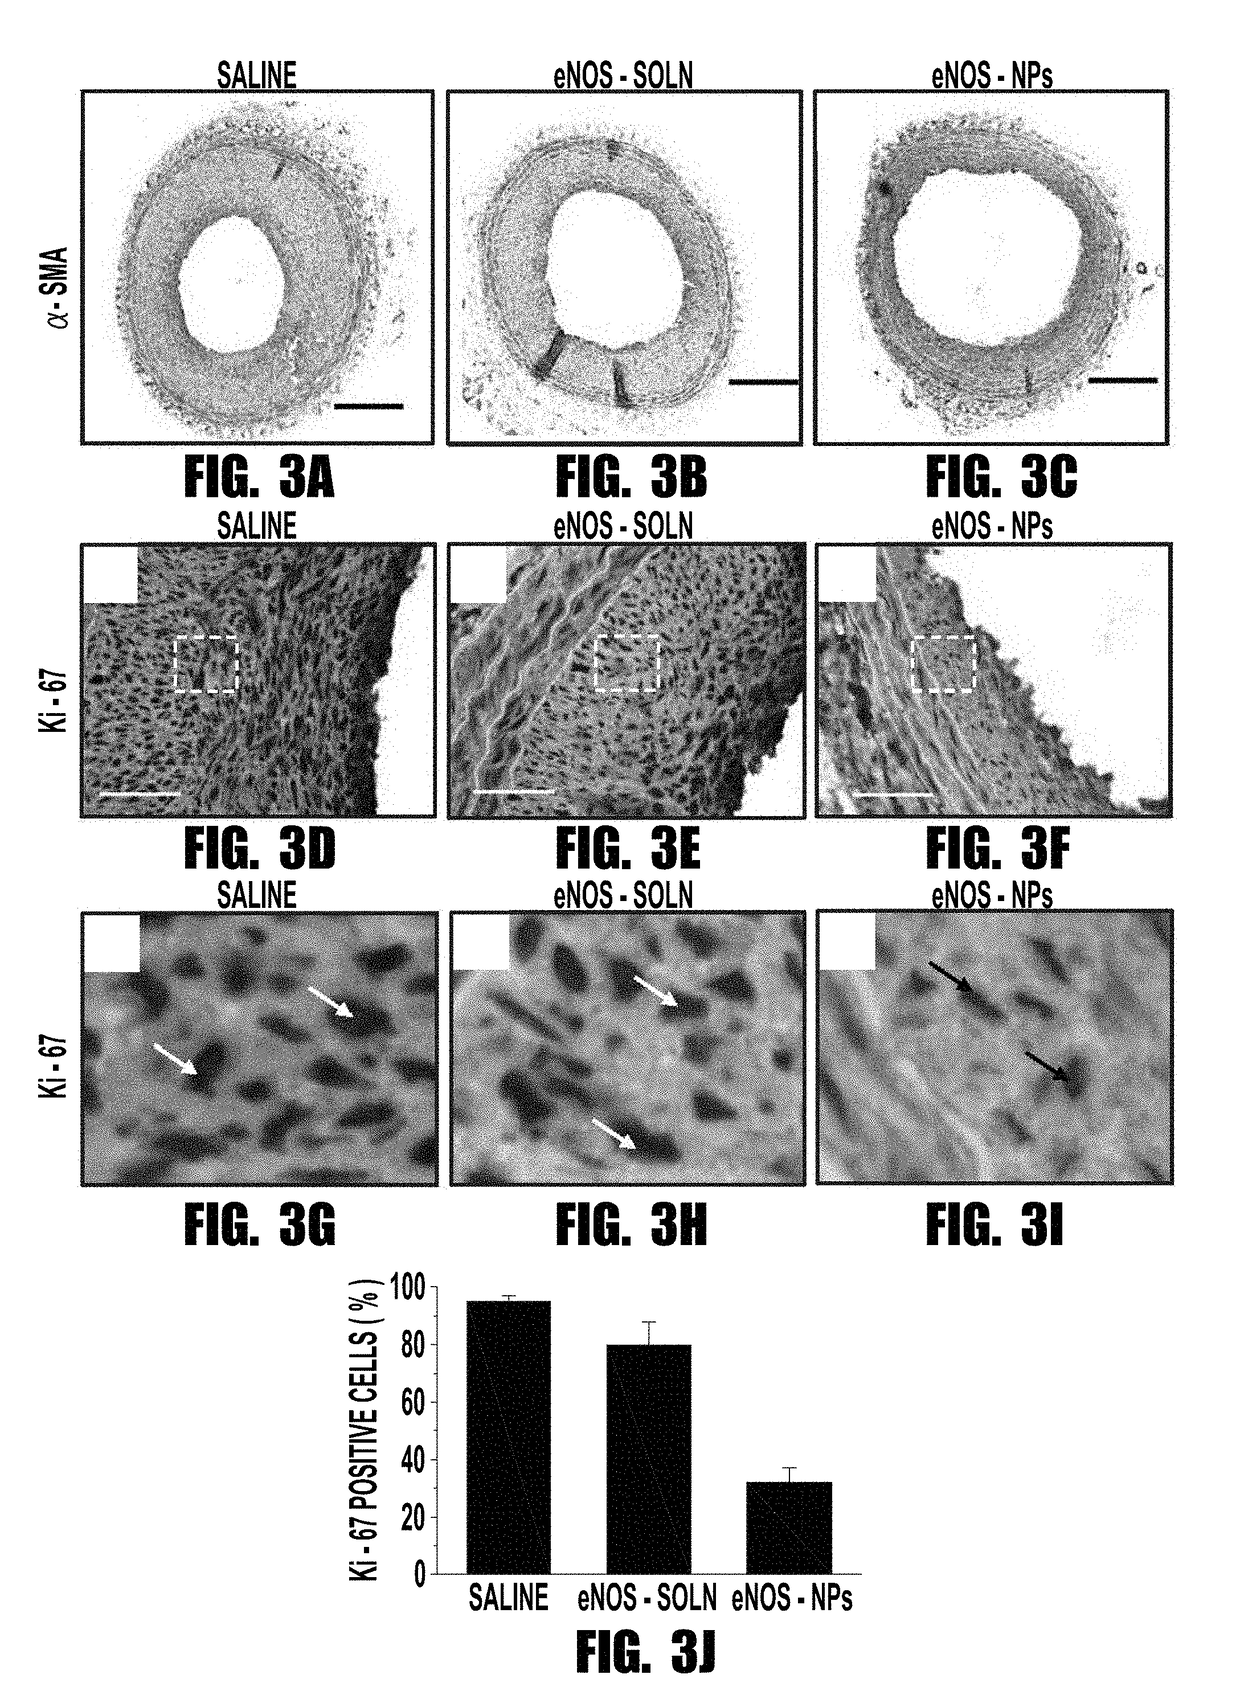 Nitric oxide synthase nanoparticles for treatment of vascular disease